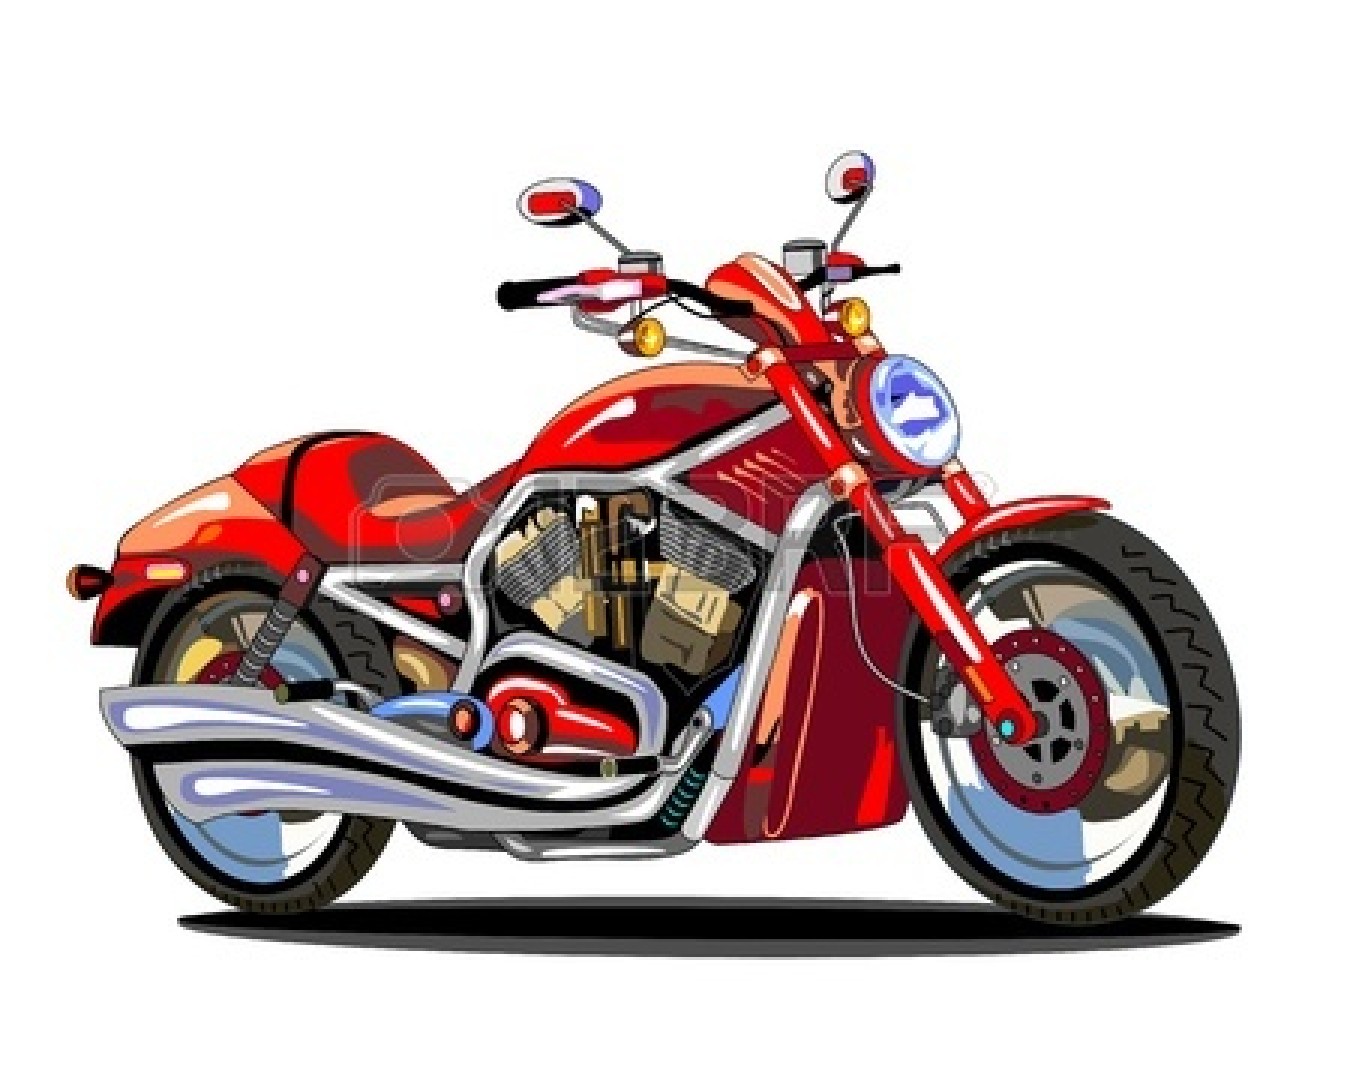 Motorcycle Clipart 